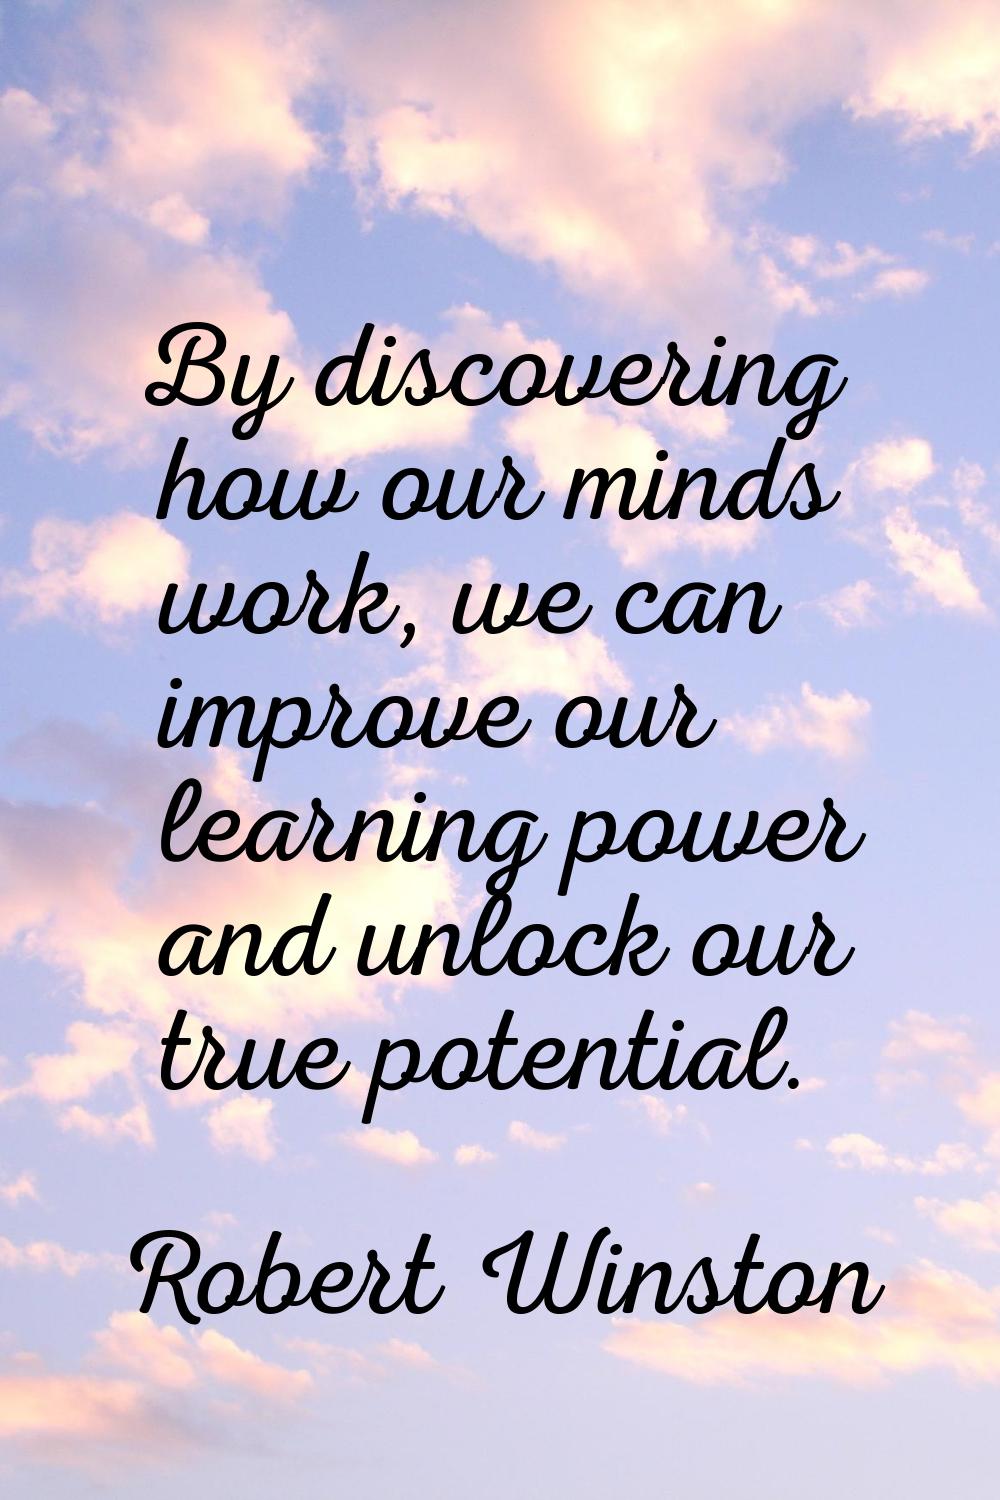 By discovering how our minds work, we can improve our learning power and unlock our true potential.